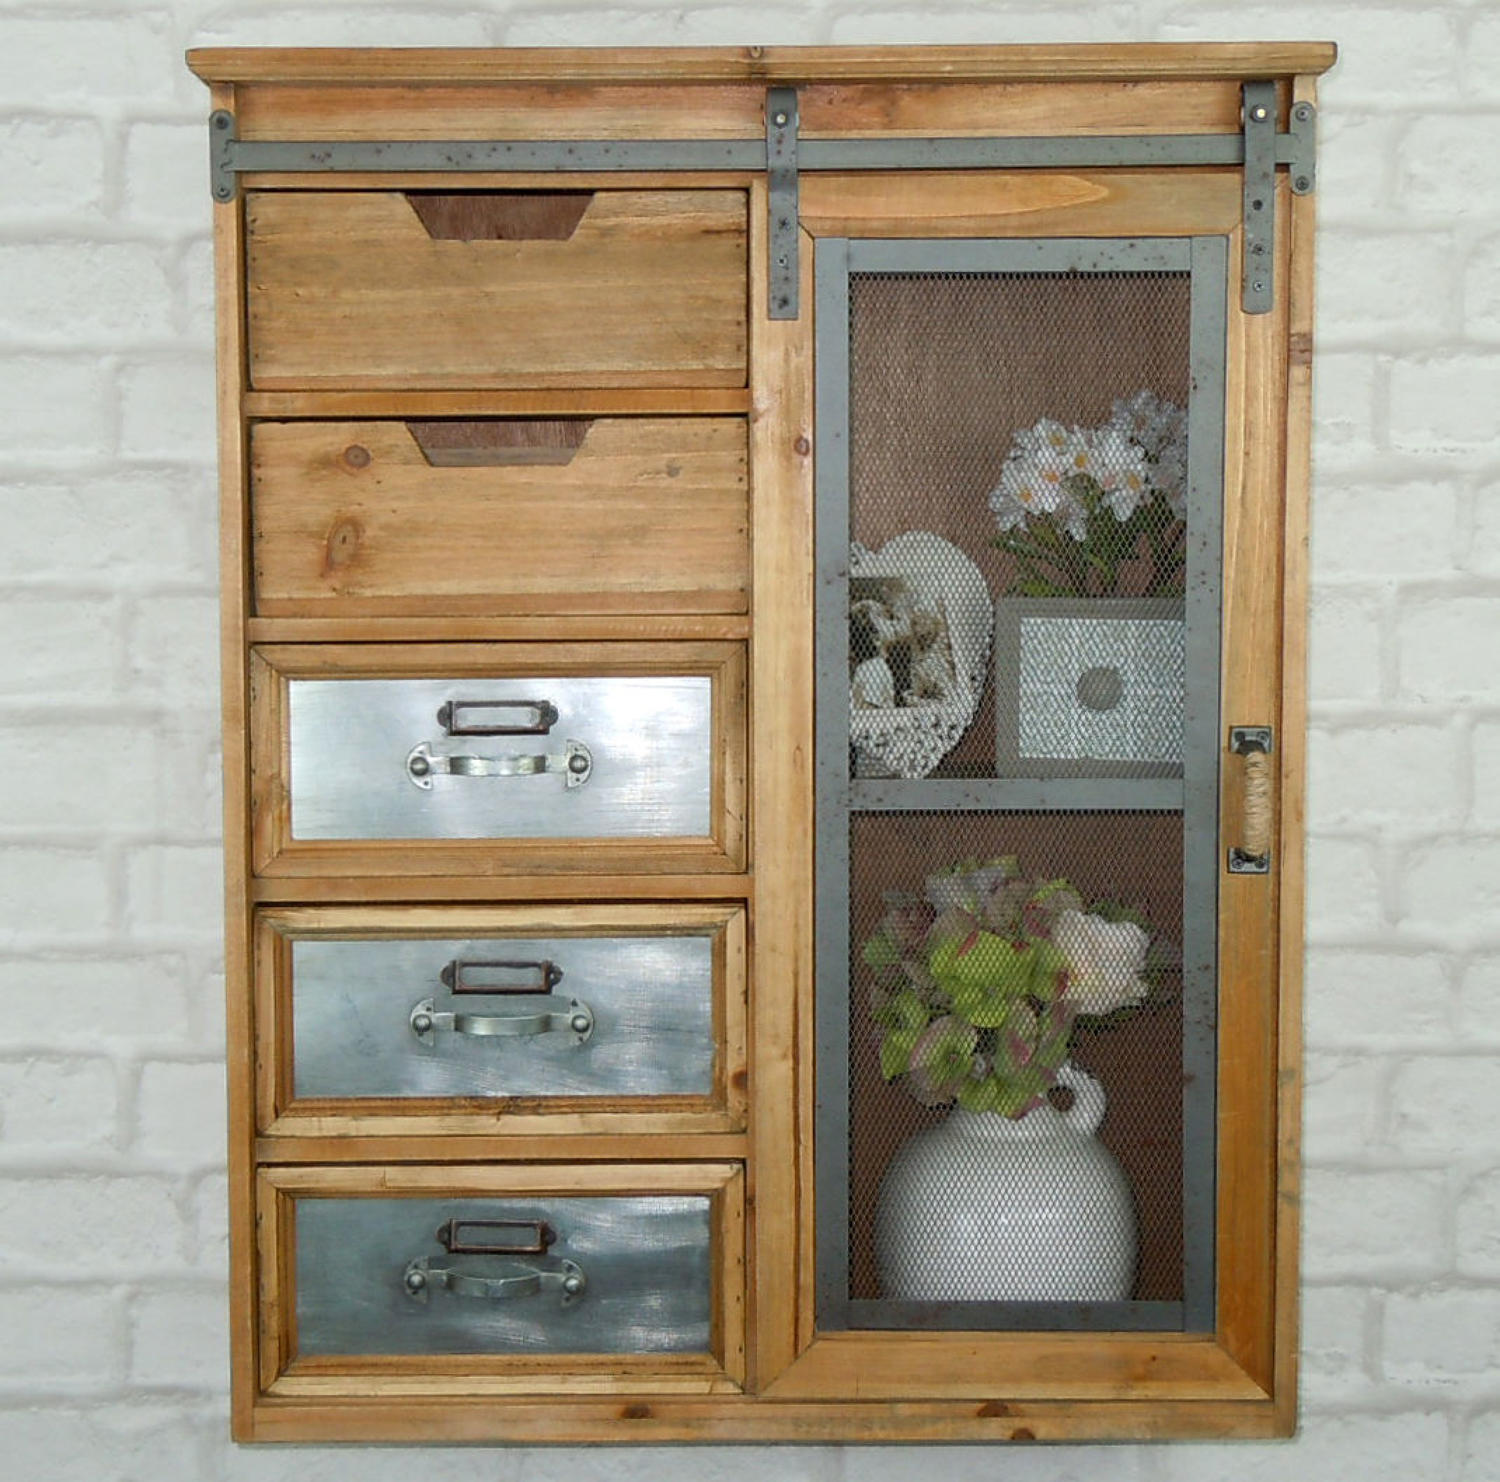 Industrial Wall Cabinet